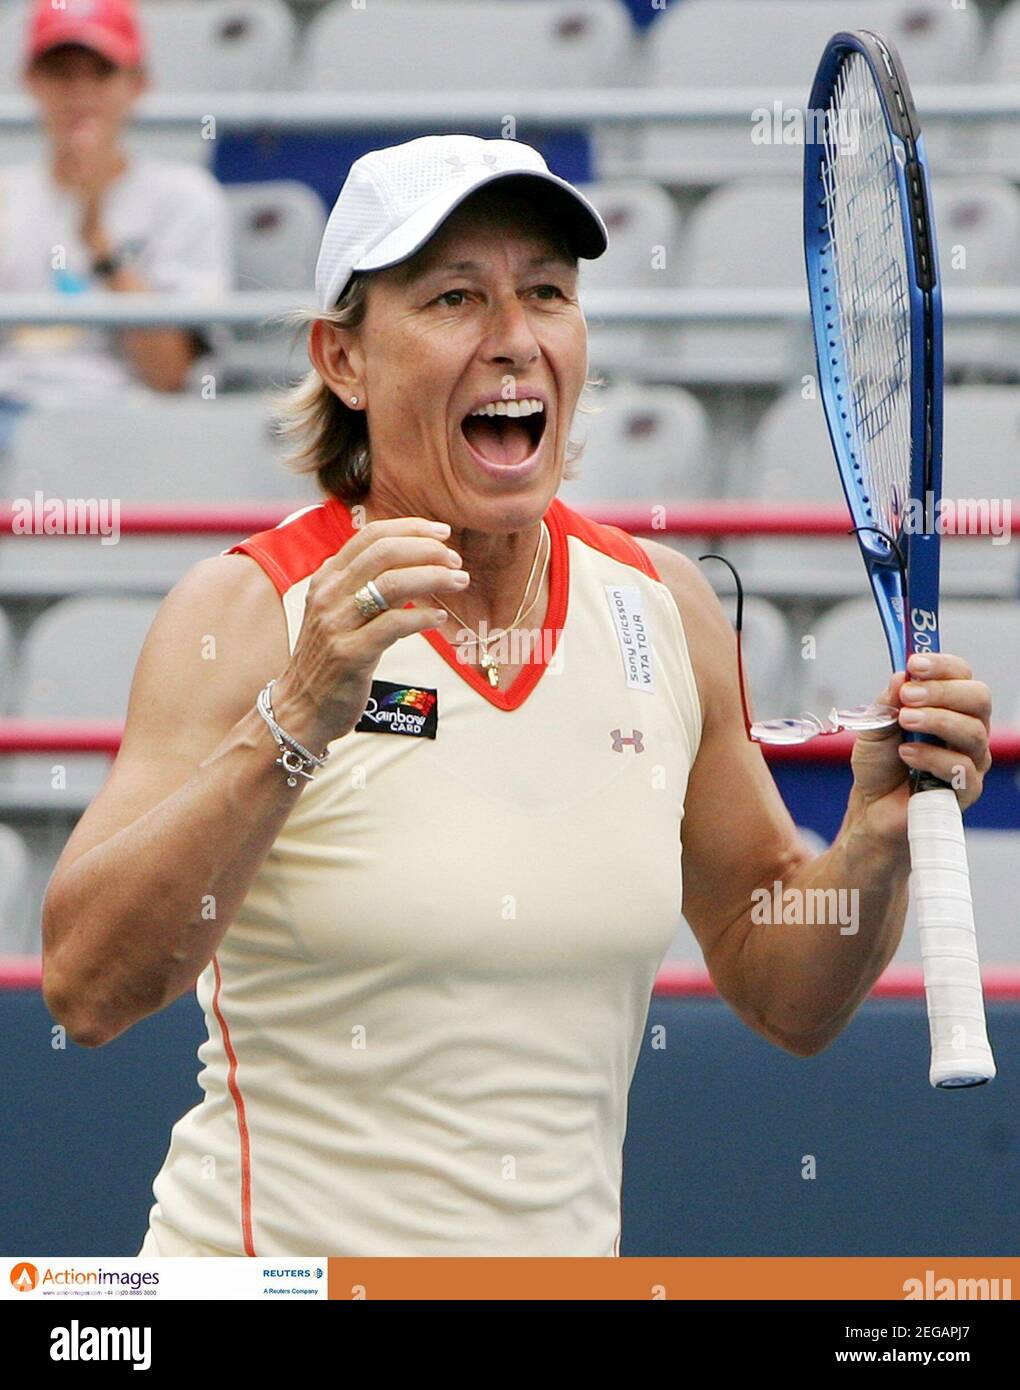 Tennis - Rogers Cup, Sony Ericsson WTA Tour - Montreal, Canada - 21/8/06  Martina Navratilova celebrates her win in the doubles finals at the Rogers  Cup, Sony Ericsson WTA Tour Mandatory Credit: